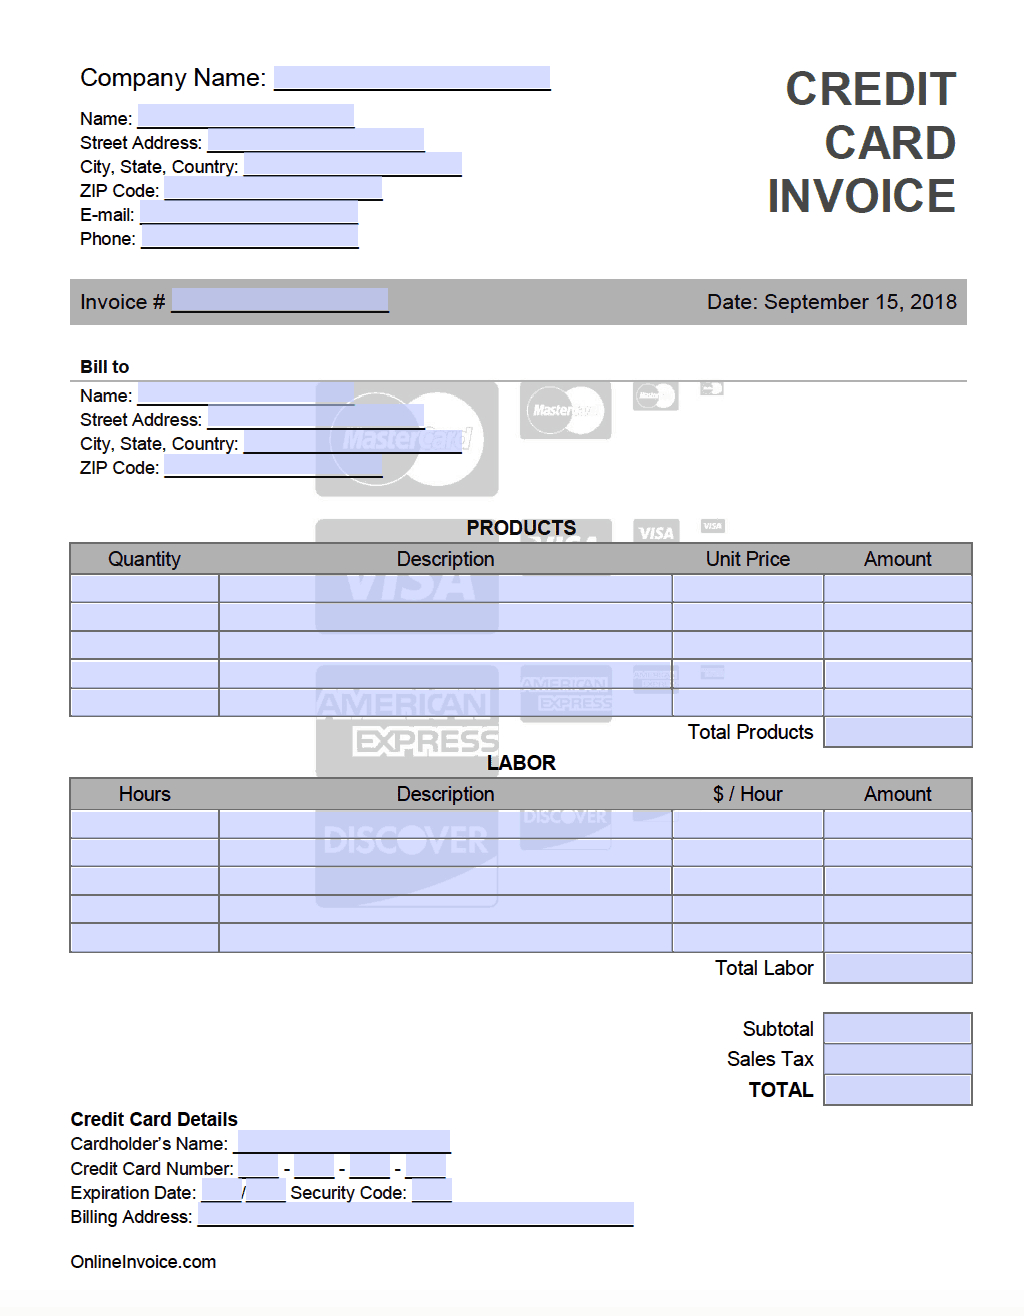 Credit Card Invoice Template – Onlineinvoice With Regard To Credit Card Receipt Template